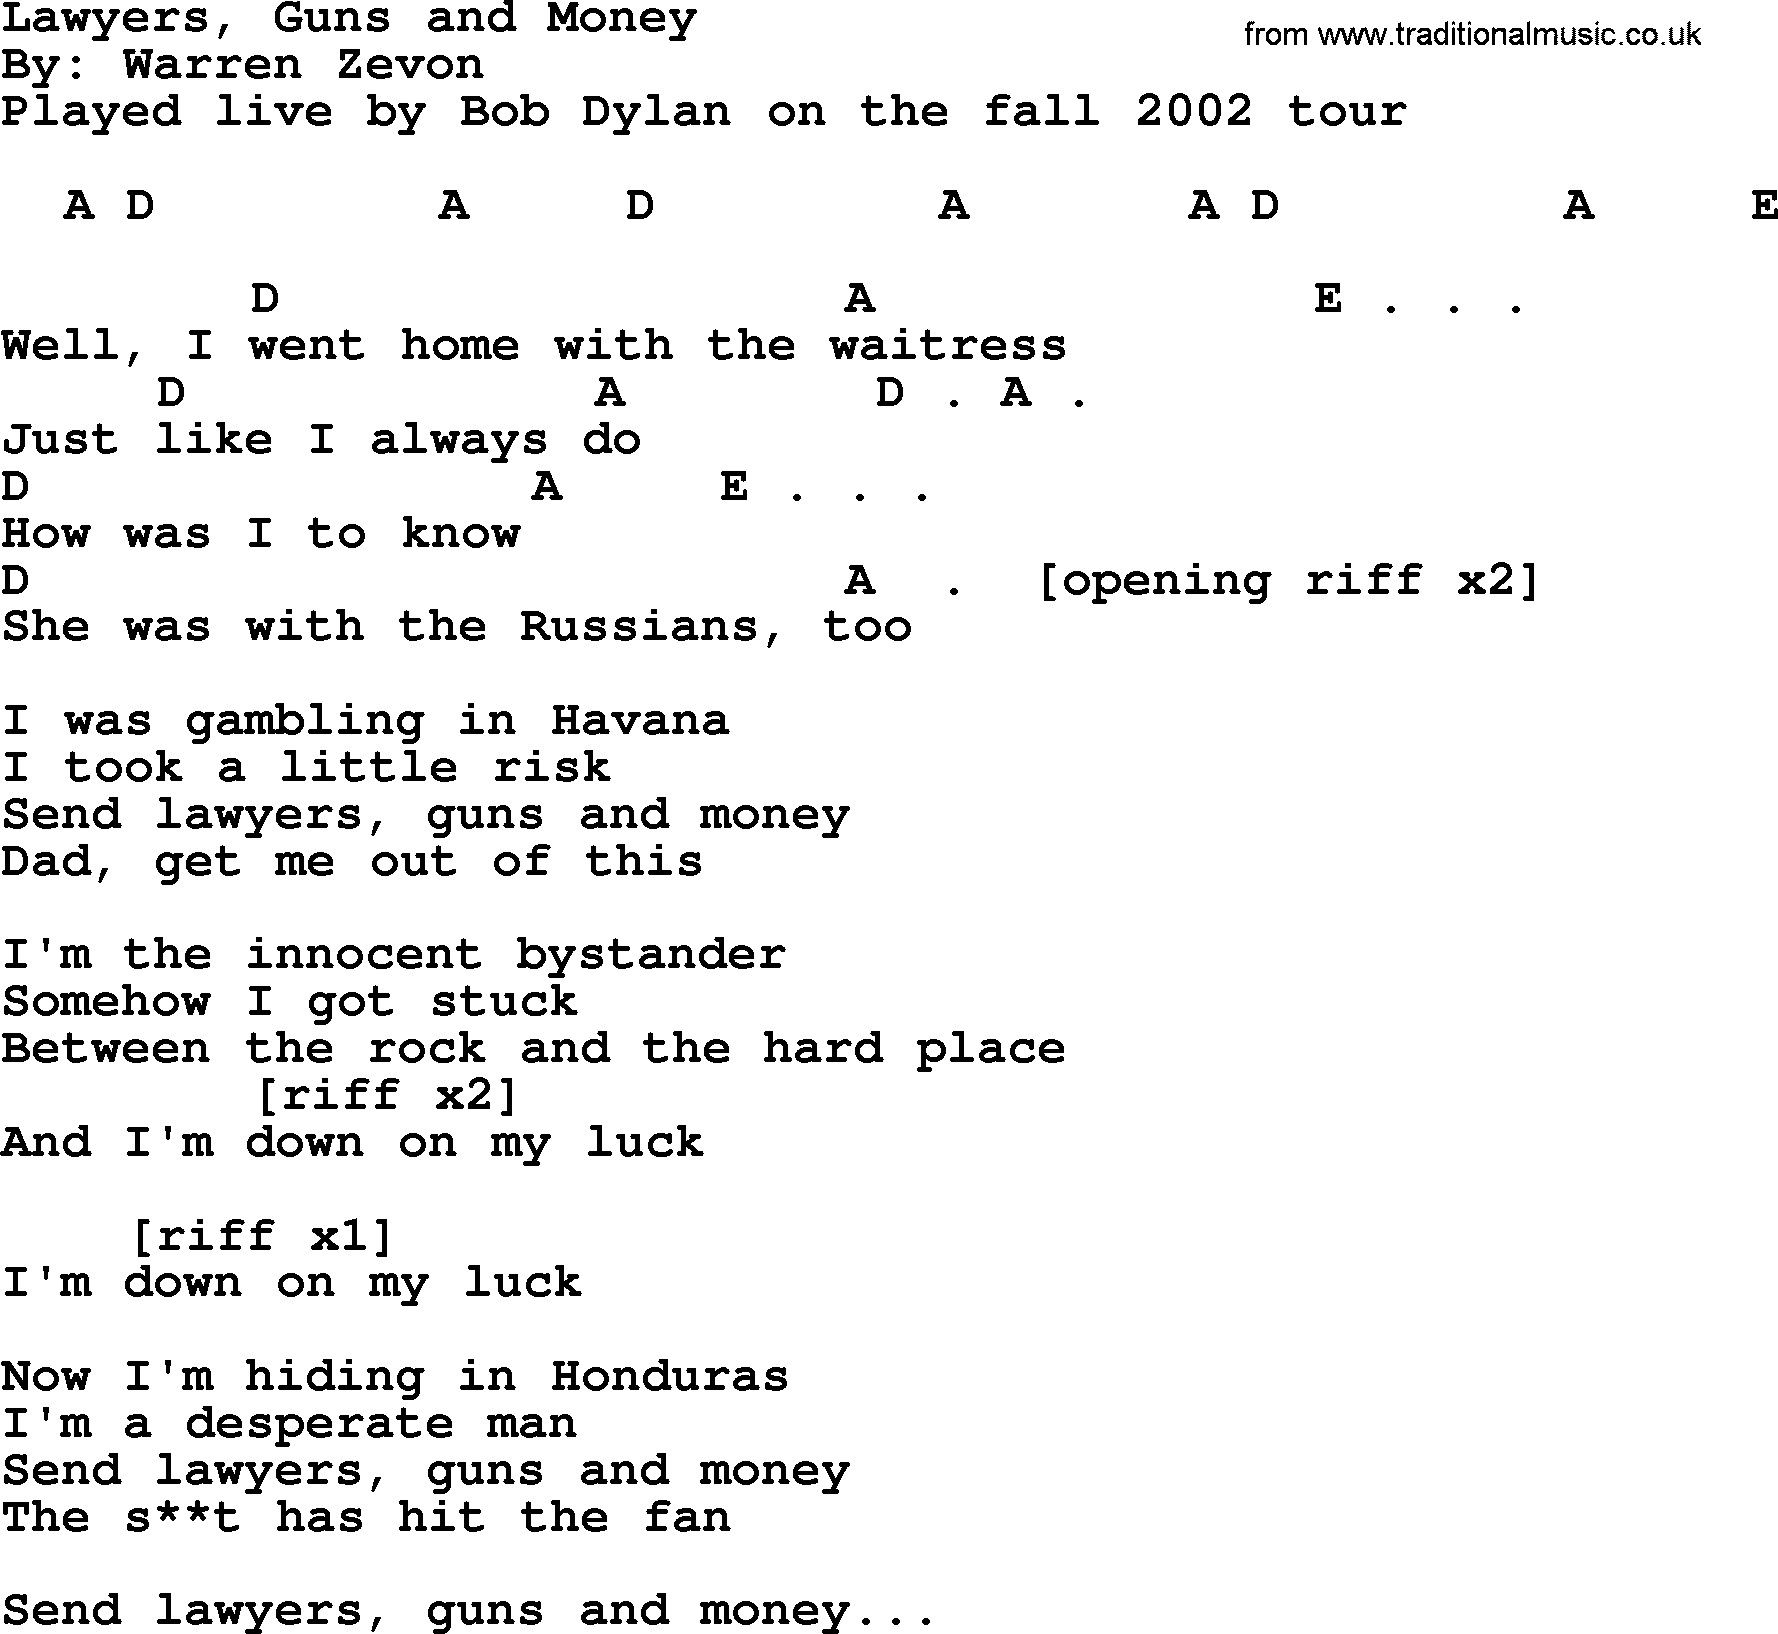 Bob Dylan song, lyrics with chords - Lawyers, Guns and Money